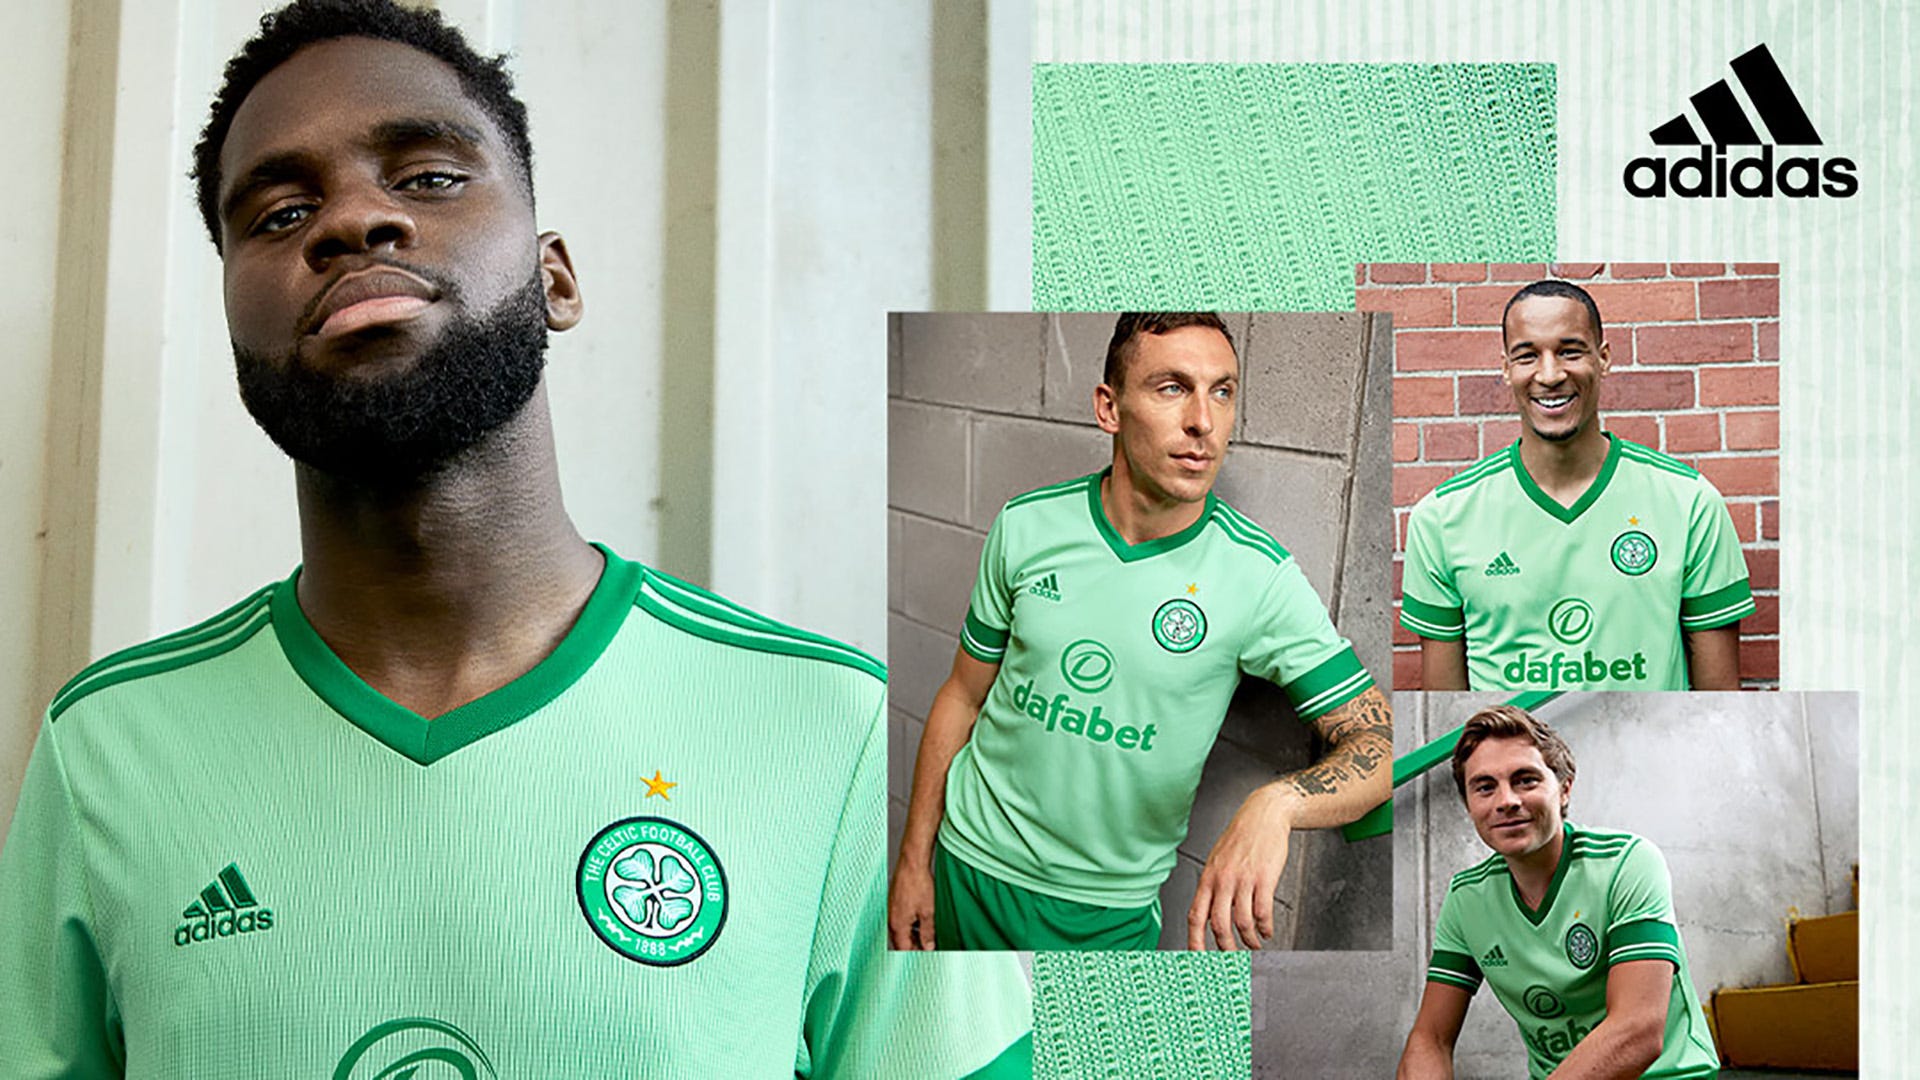 The most hyped football kits for the 2020/21 season